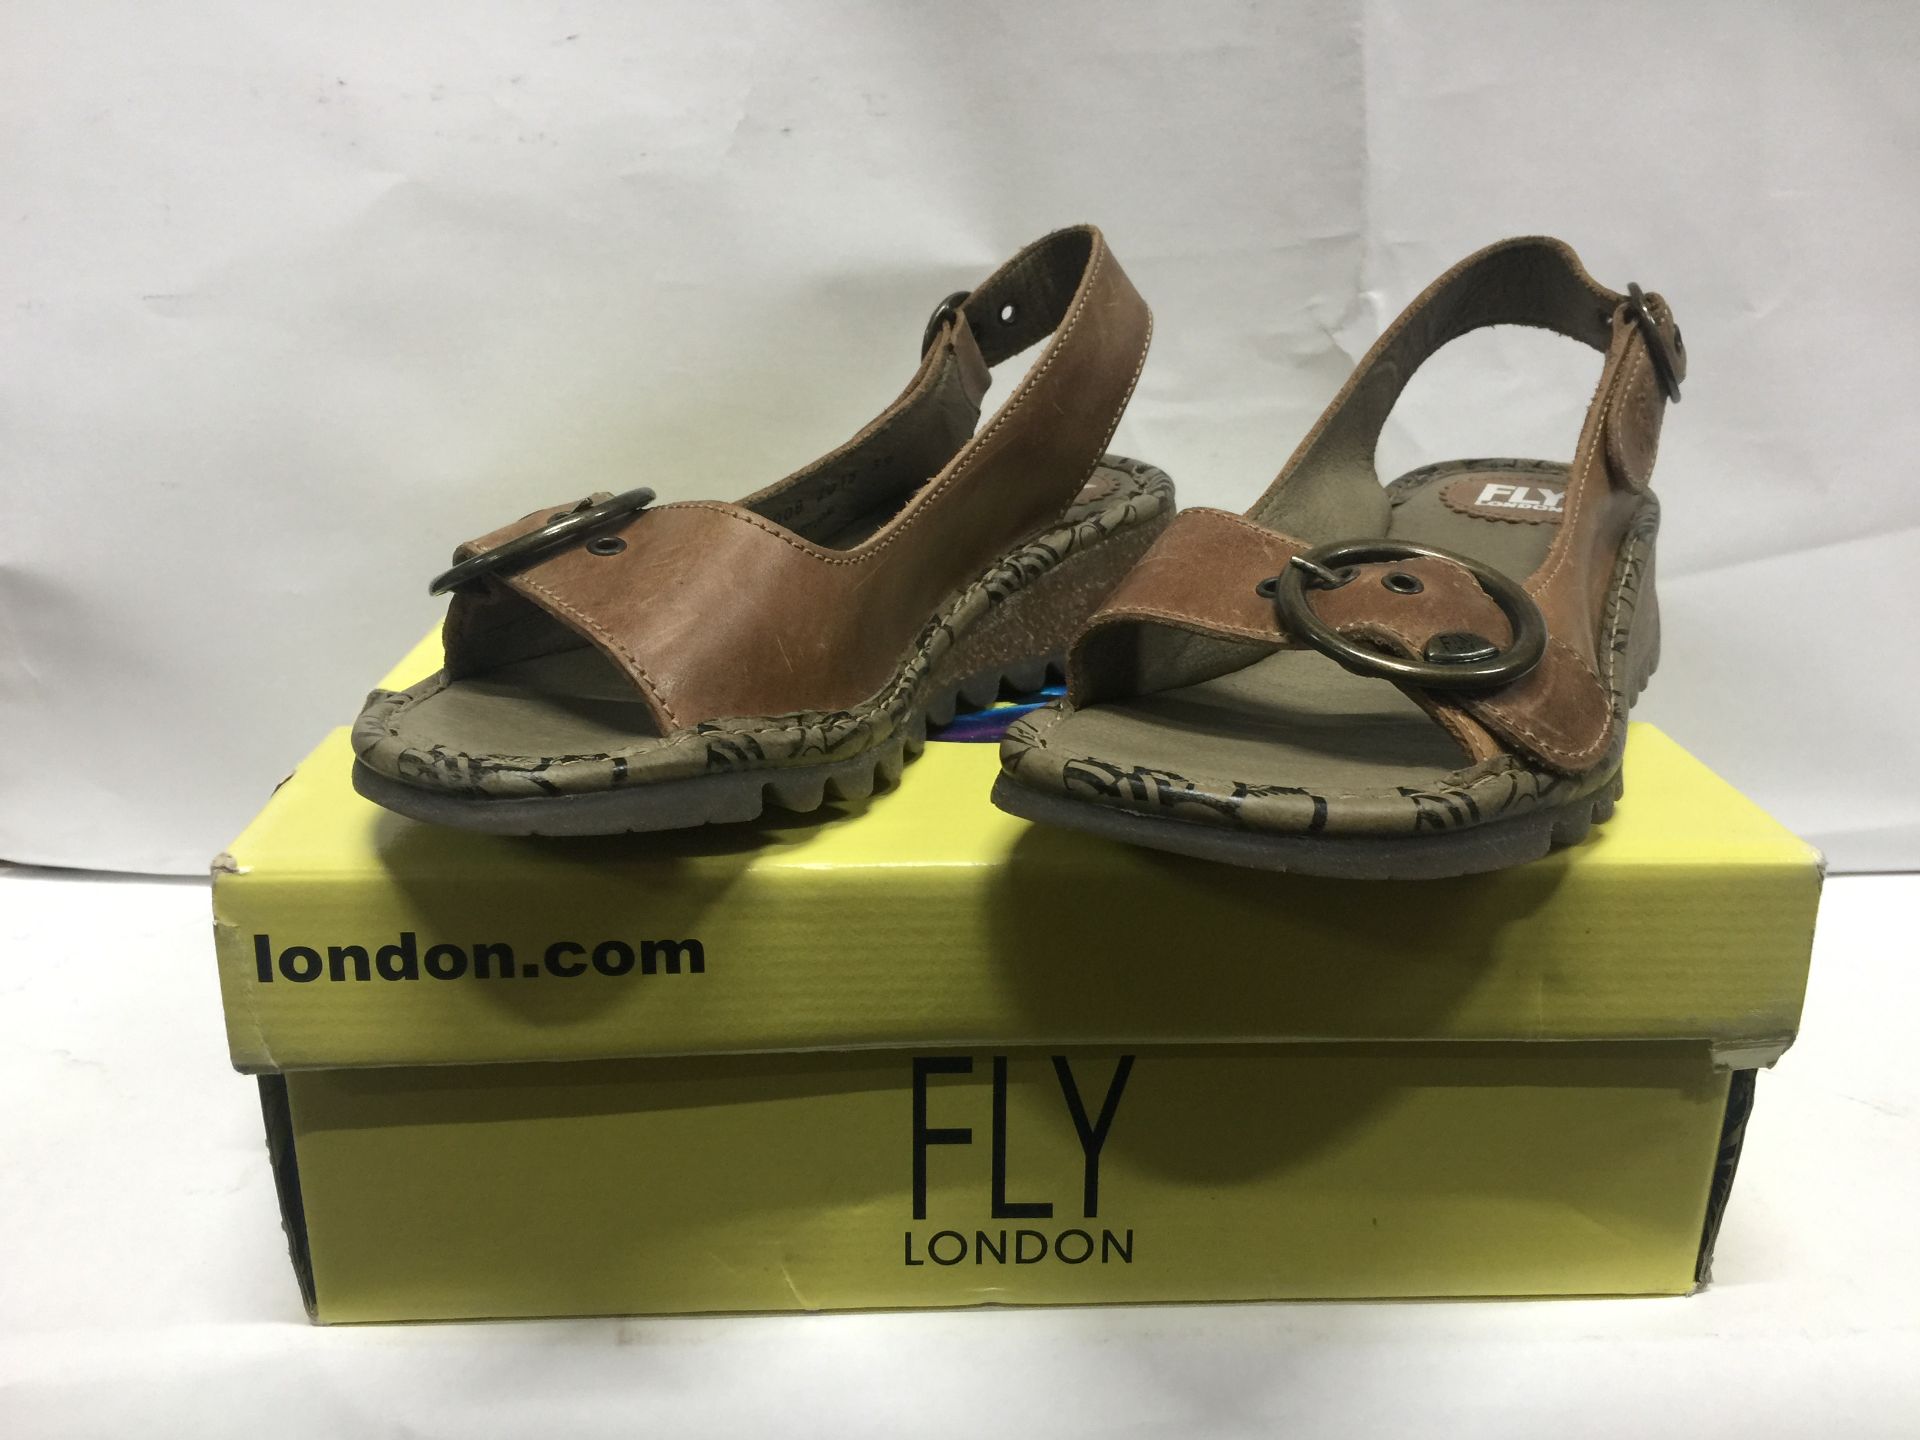 21 x Fly London Women's Sandles Mixed Sizes, Styles and Colours Size Ranging EU 36 - EU 41 - Custome - Image 2 of 6